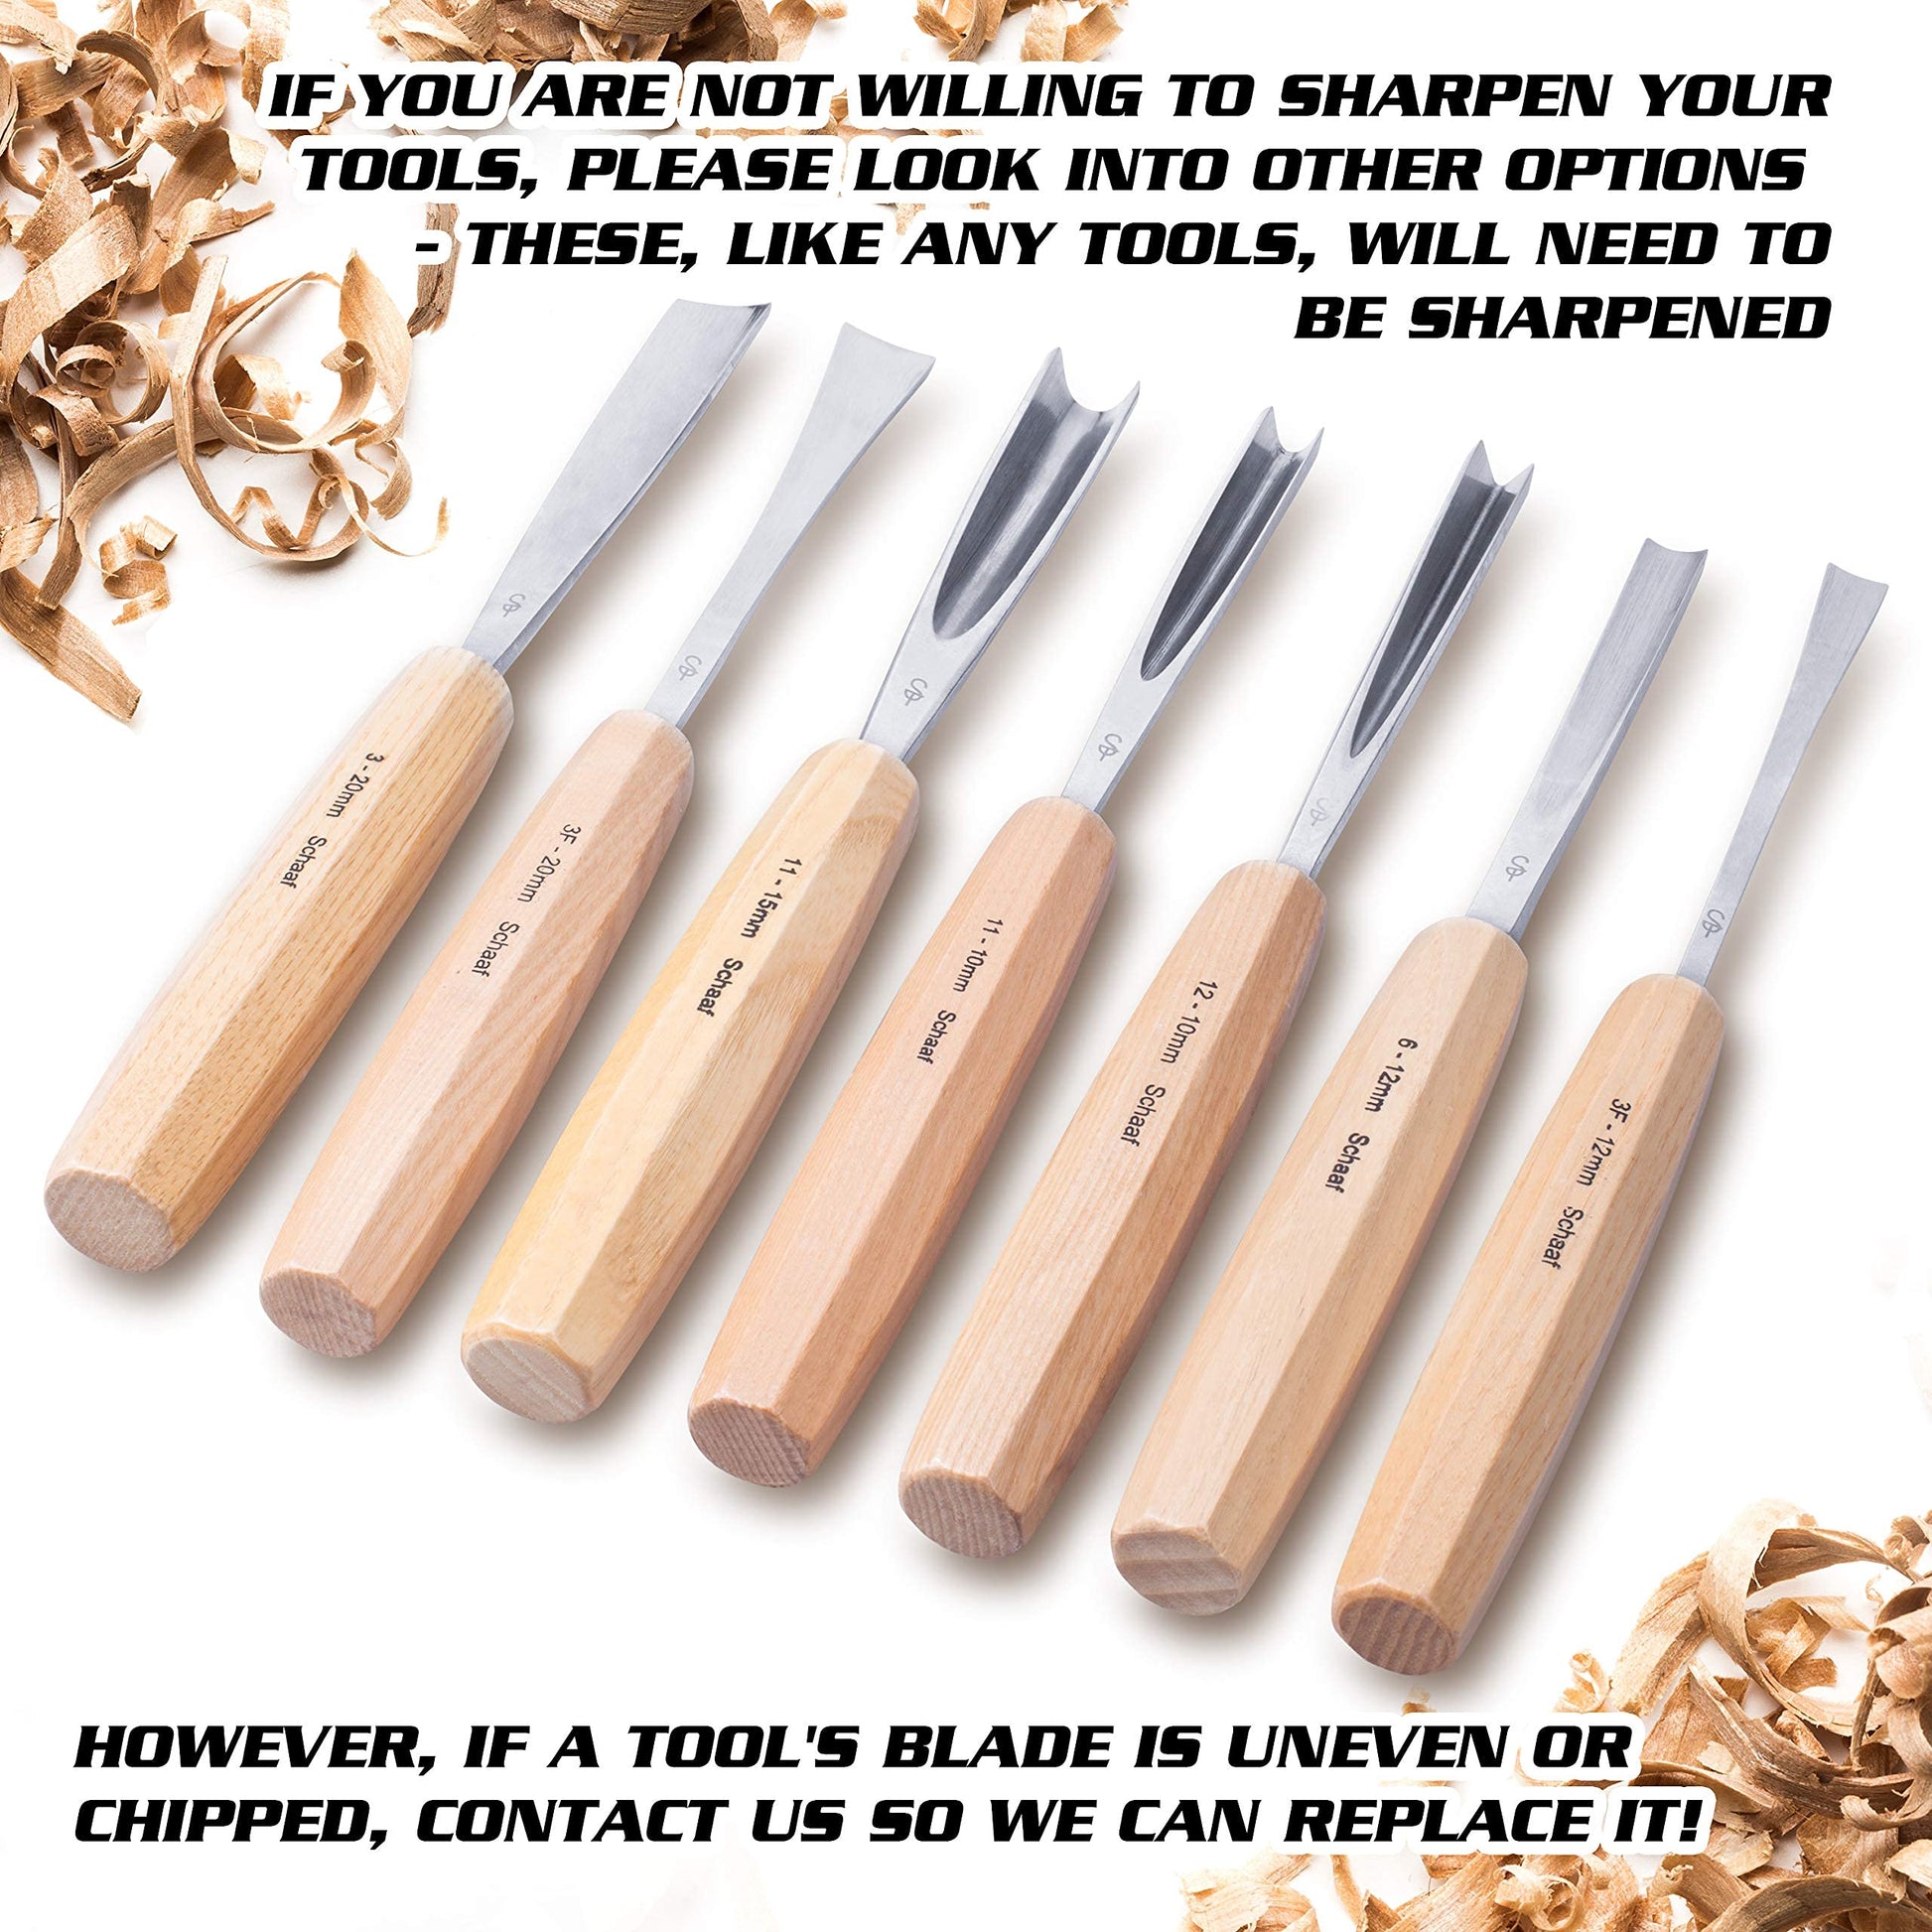 Schaaf Tools 4-Piece Wood Chisel Set | Finely Crafted Wood Chisels for  Woodworking | Durable Cr-V Steel Bevel Edged Blade, Tempered to 60HRc |  Tool